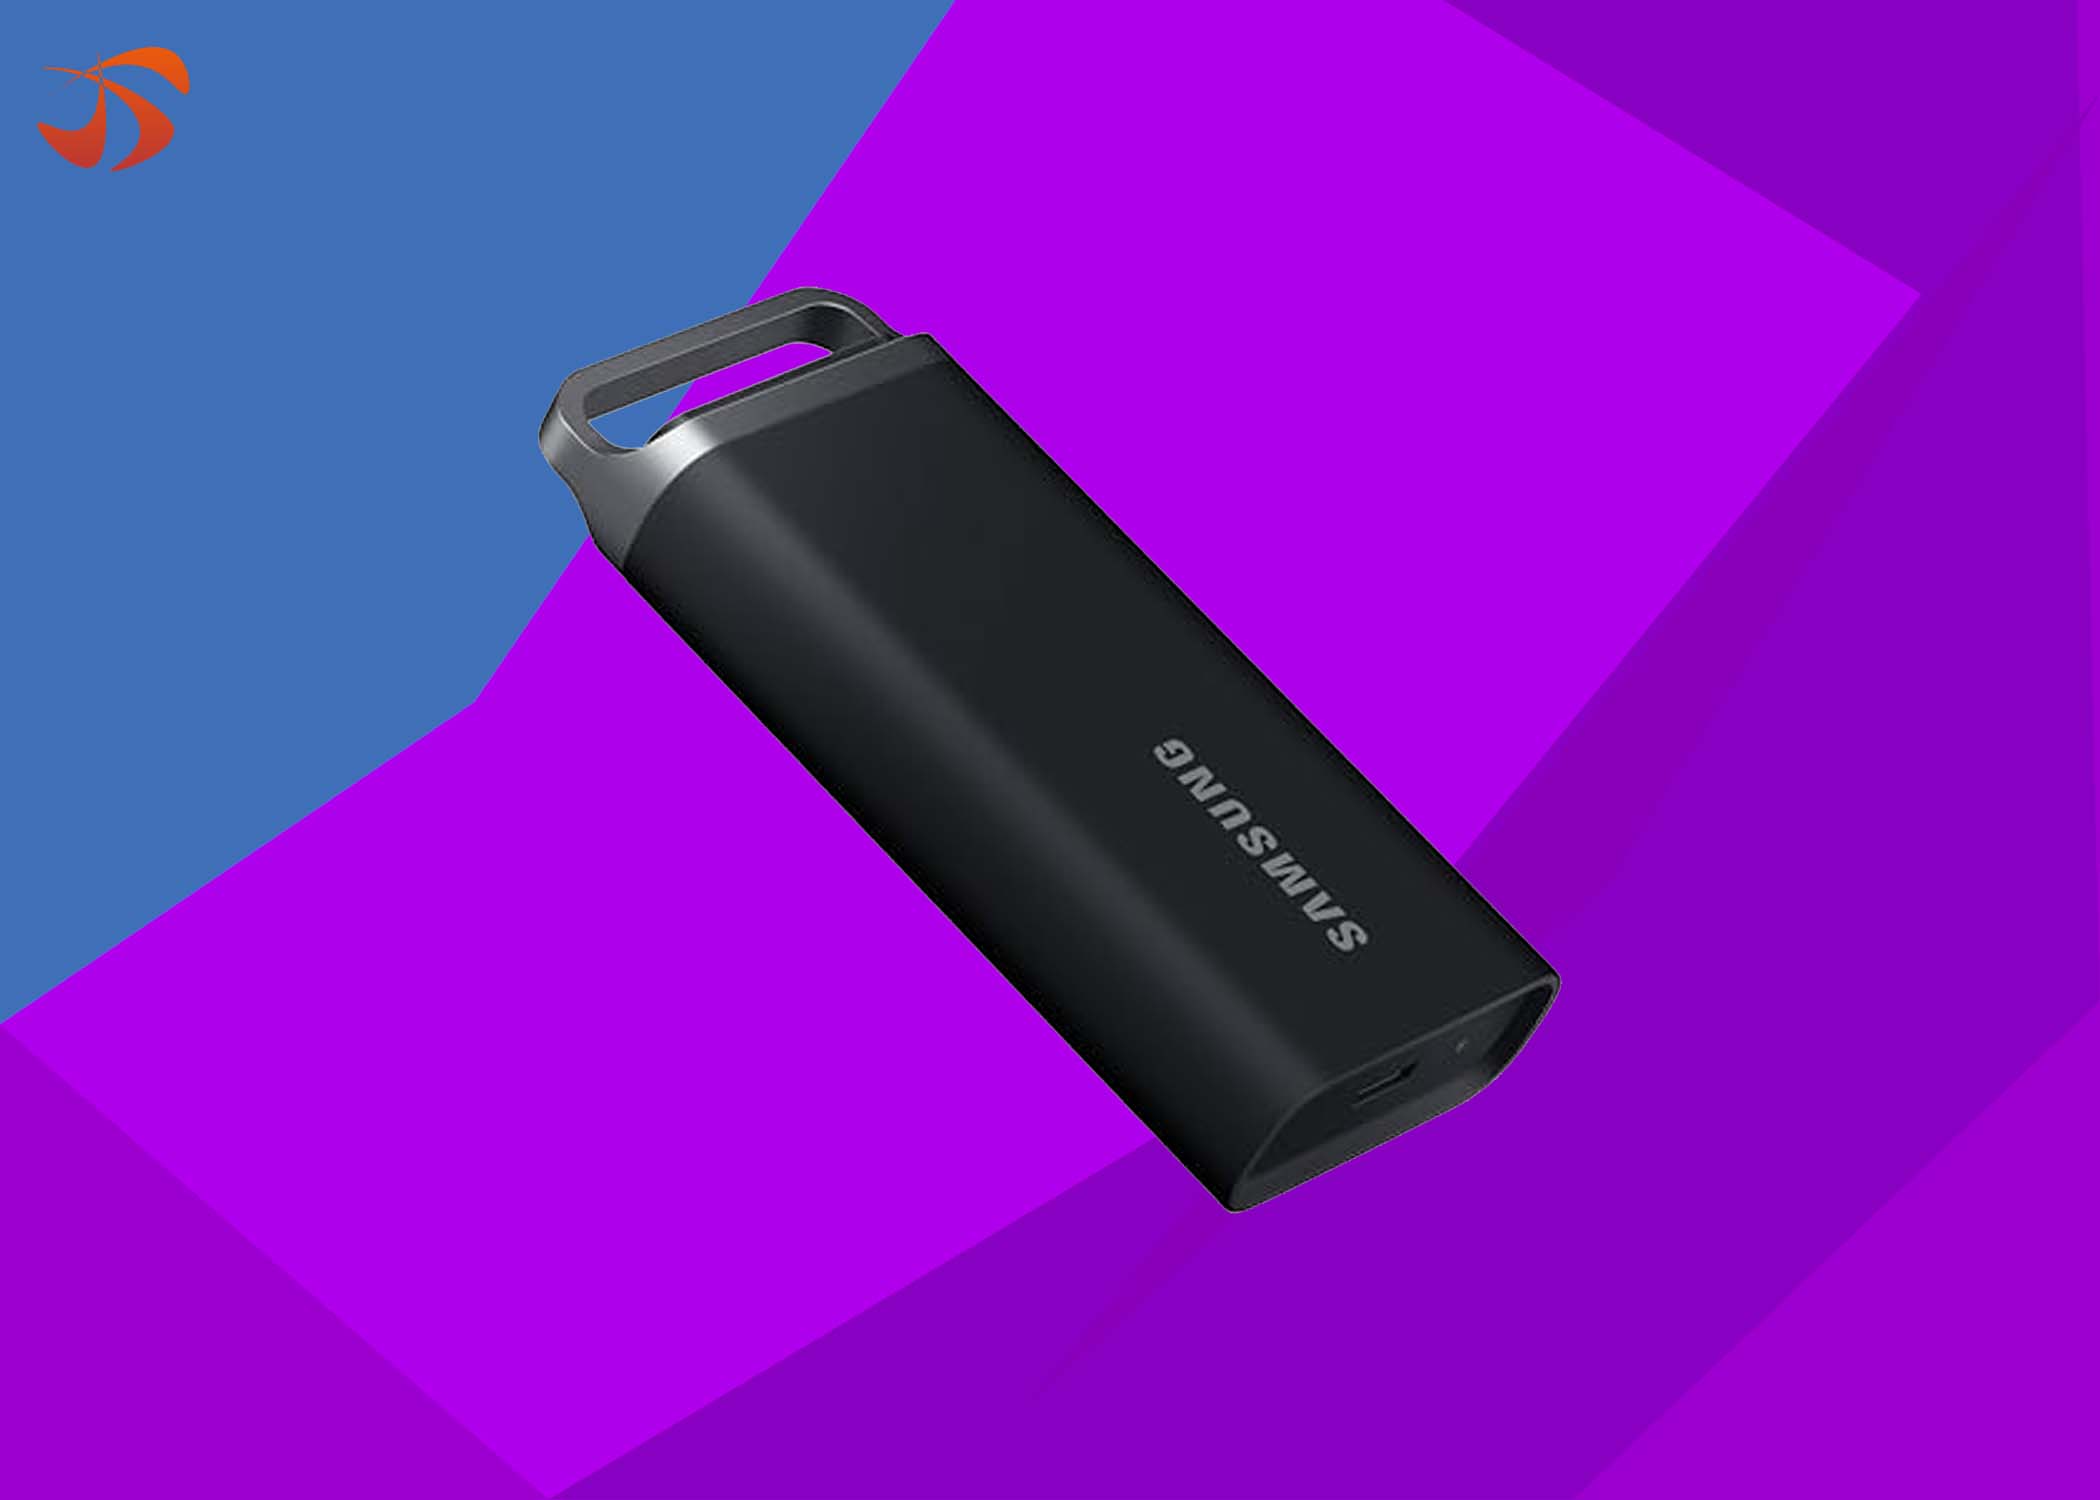 New Samsung T5 EVO portable SSD debuts today [Review]